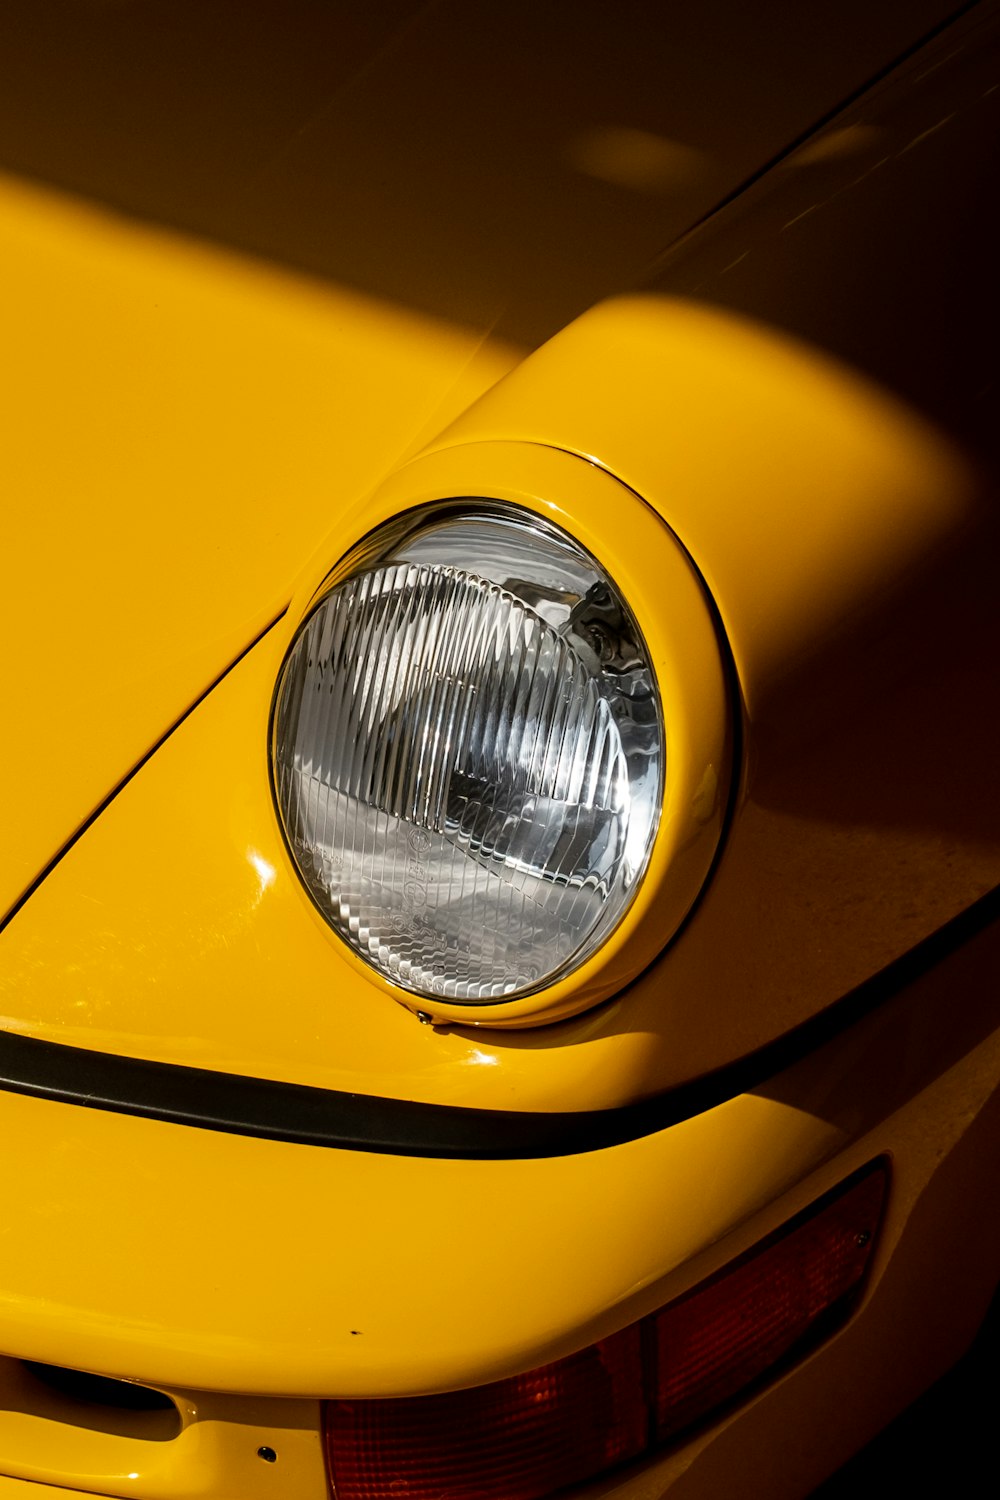 a close up of a yellow car's headlight